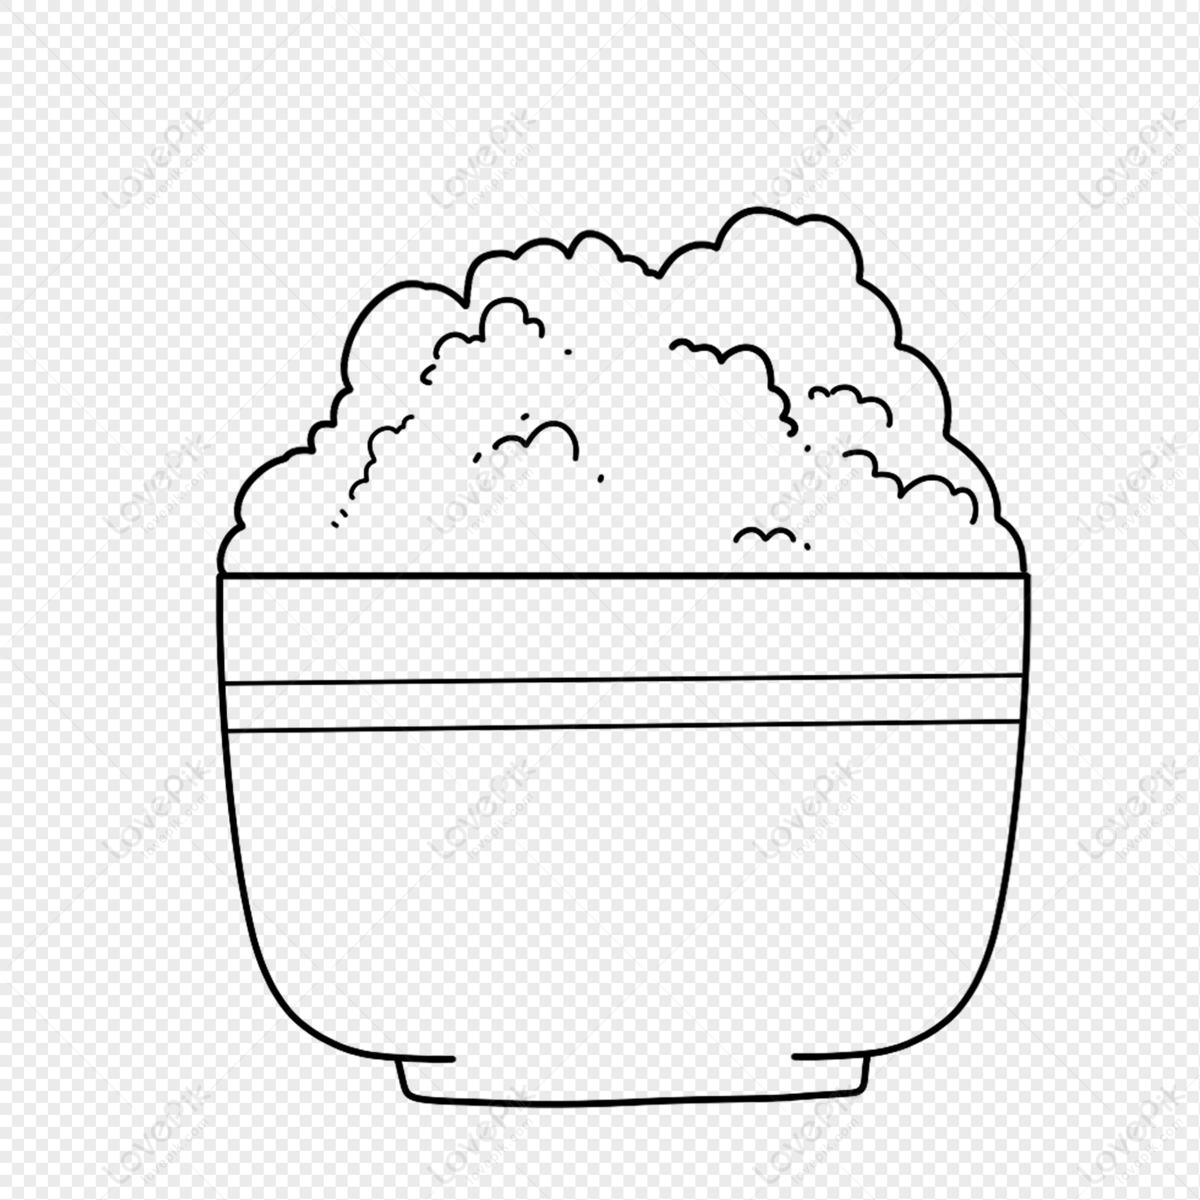 Rice Stick Drawing Line Drawing PNG Image Free Download And Clipart Image  For Free Download - Lovepik | 401691531